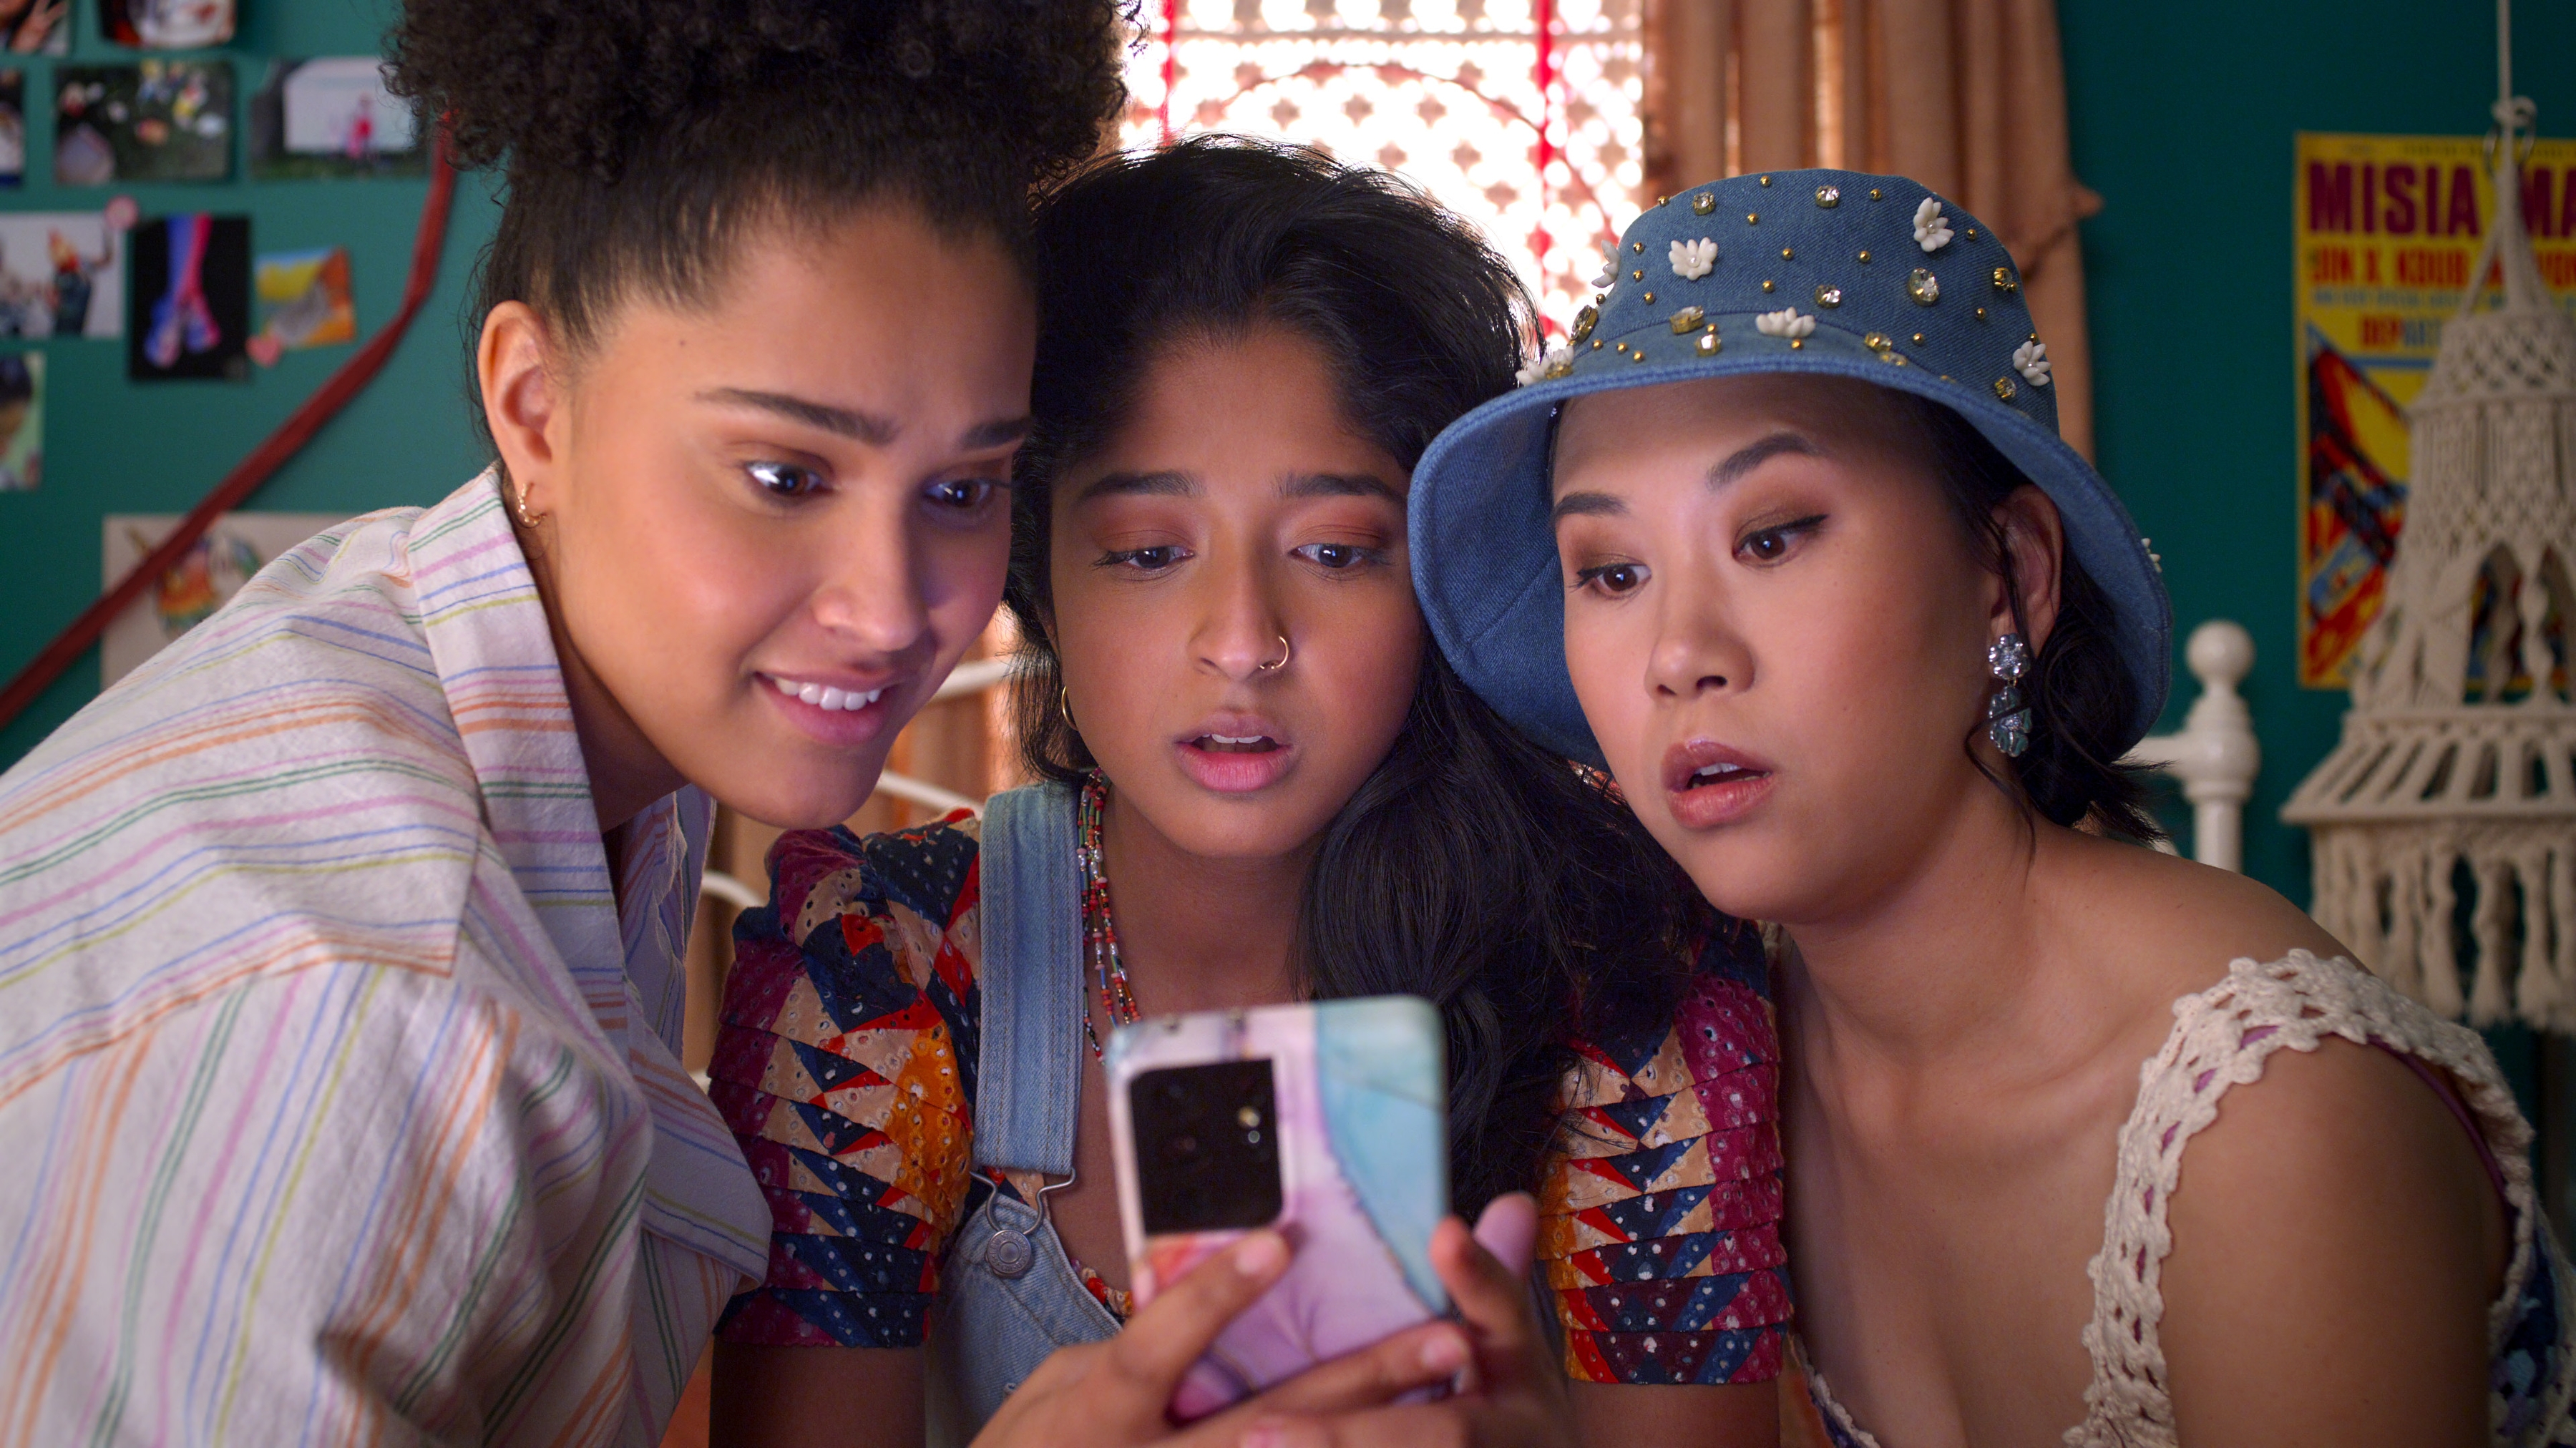 Fabiola, Devi, and Eleanor eagerly gather around Devi’s phone to read something.